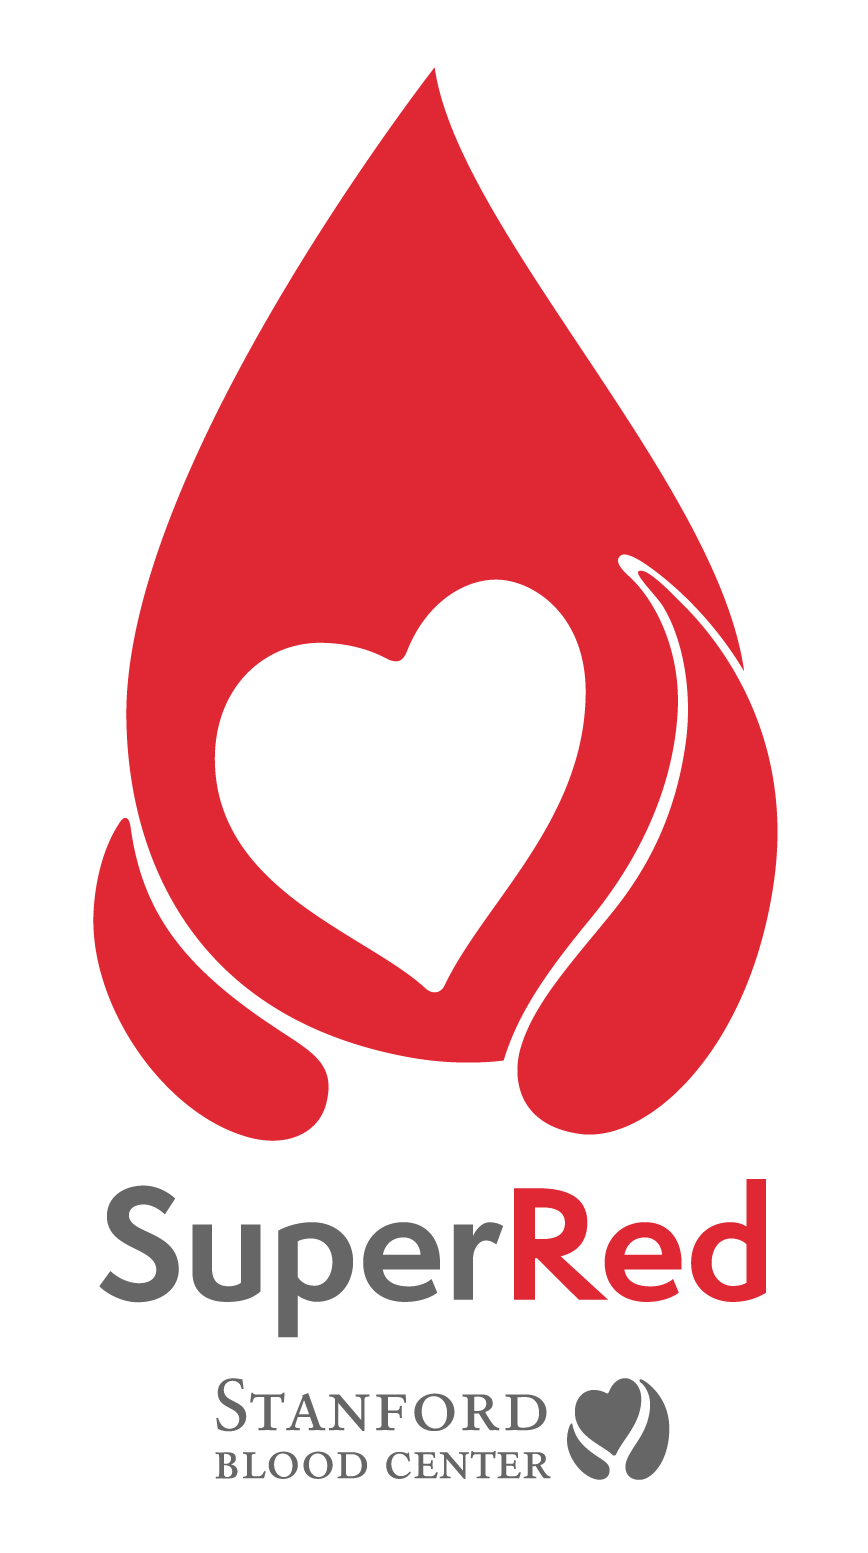 Blood donation icons - 23 Free Blood donation icons | Download PNG & SVG